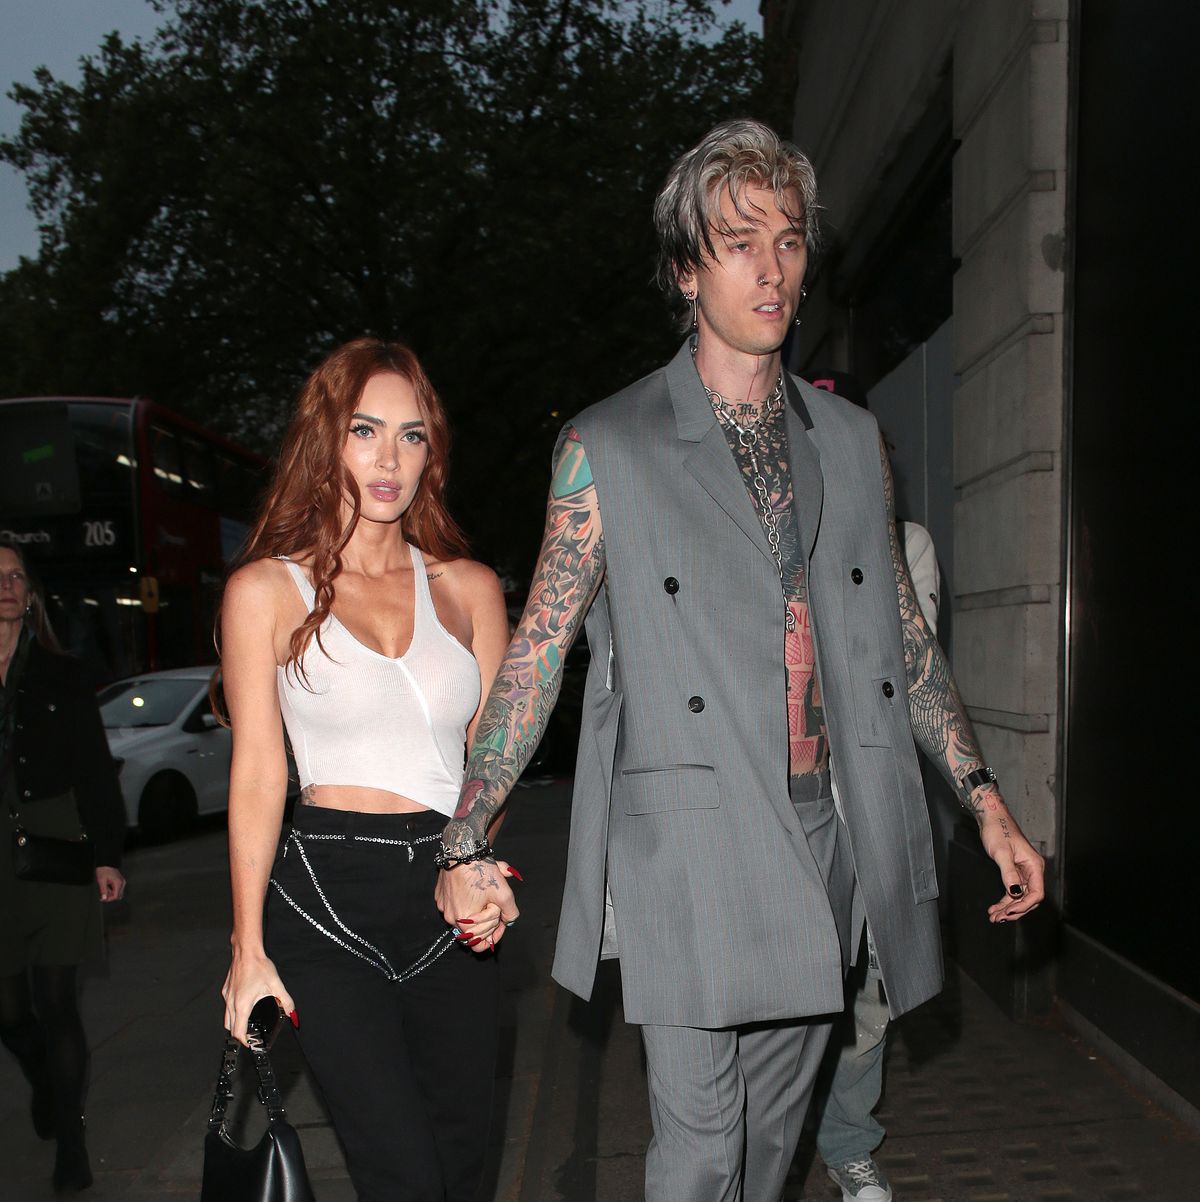 Megan Fox Stuns In Black Blazer With Chain Top On Date Night With MGK –  Hollywood Life